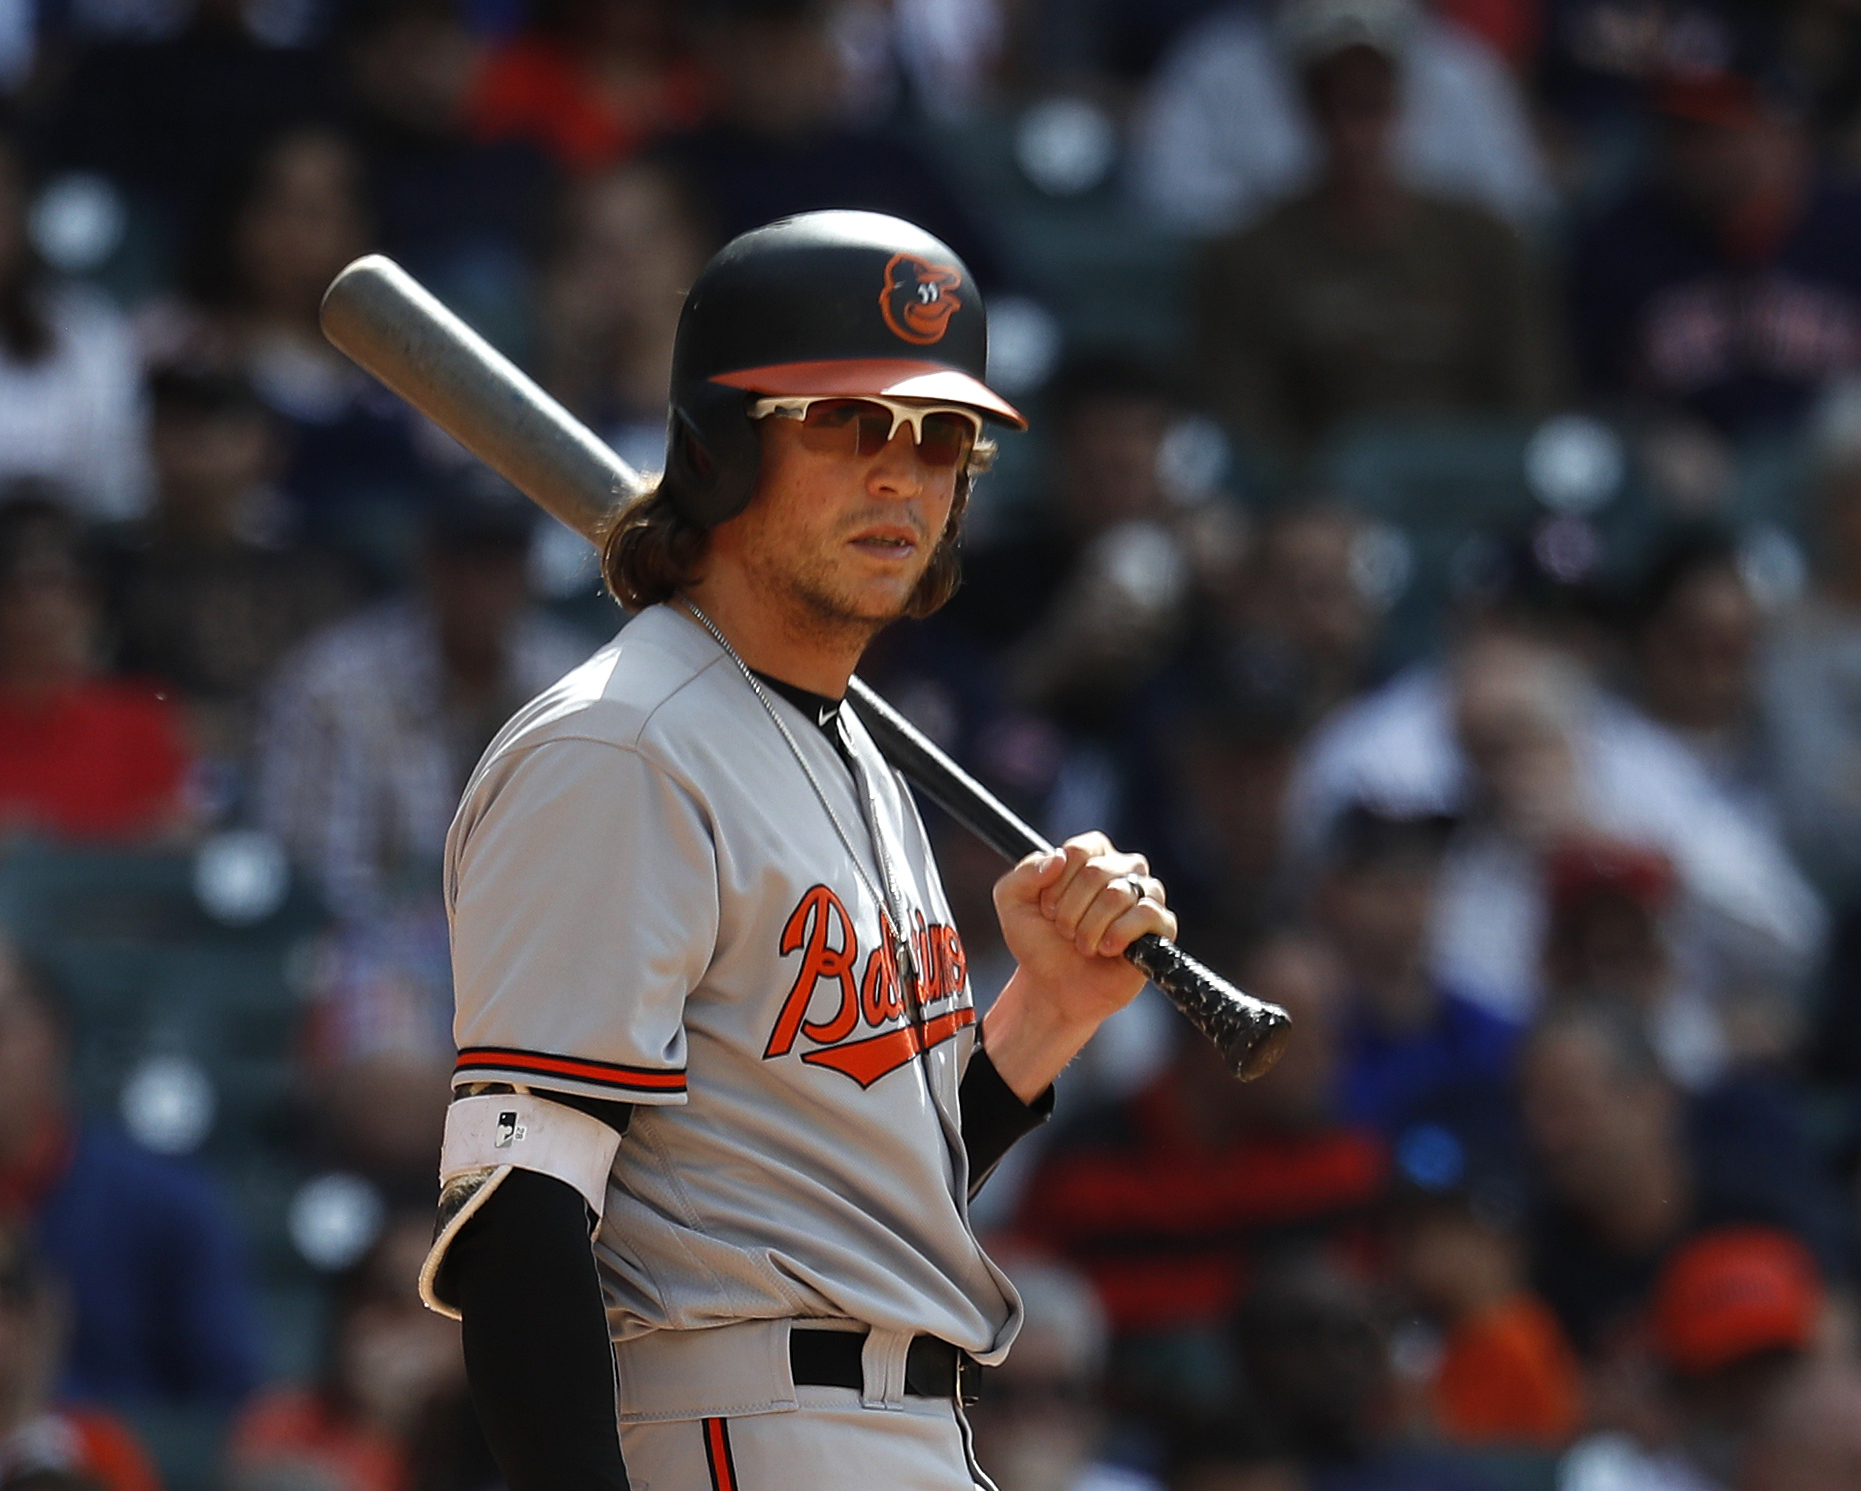 Former Astro Colby Rasmus receives warm reception from fans - Houston Chronicle1861 x 1491